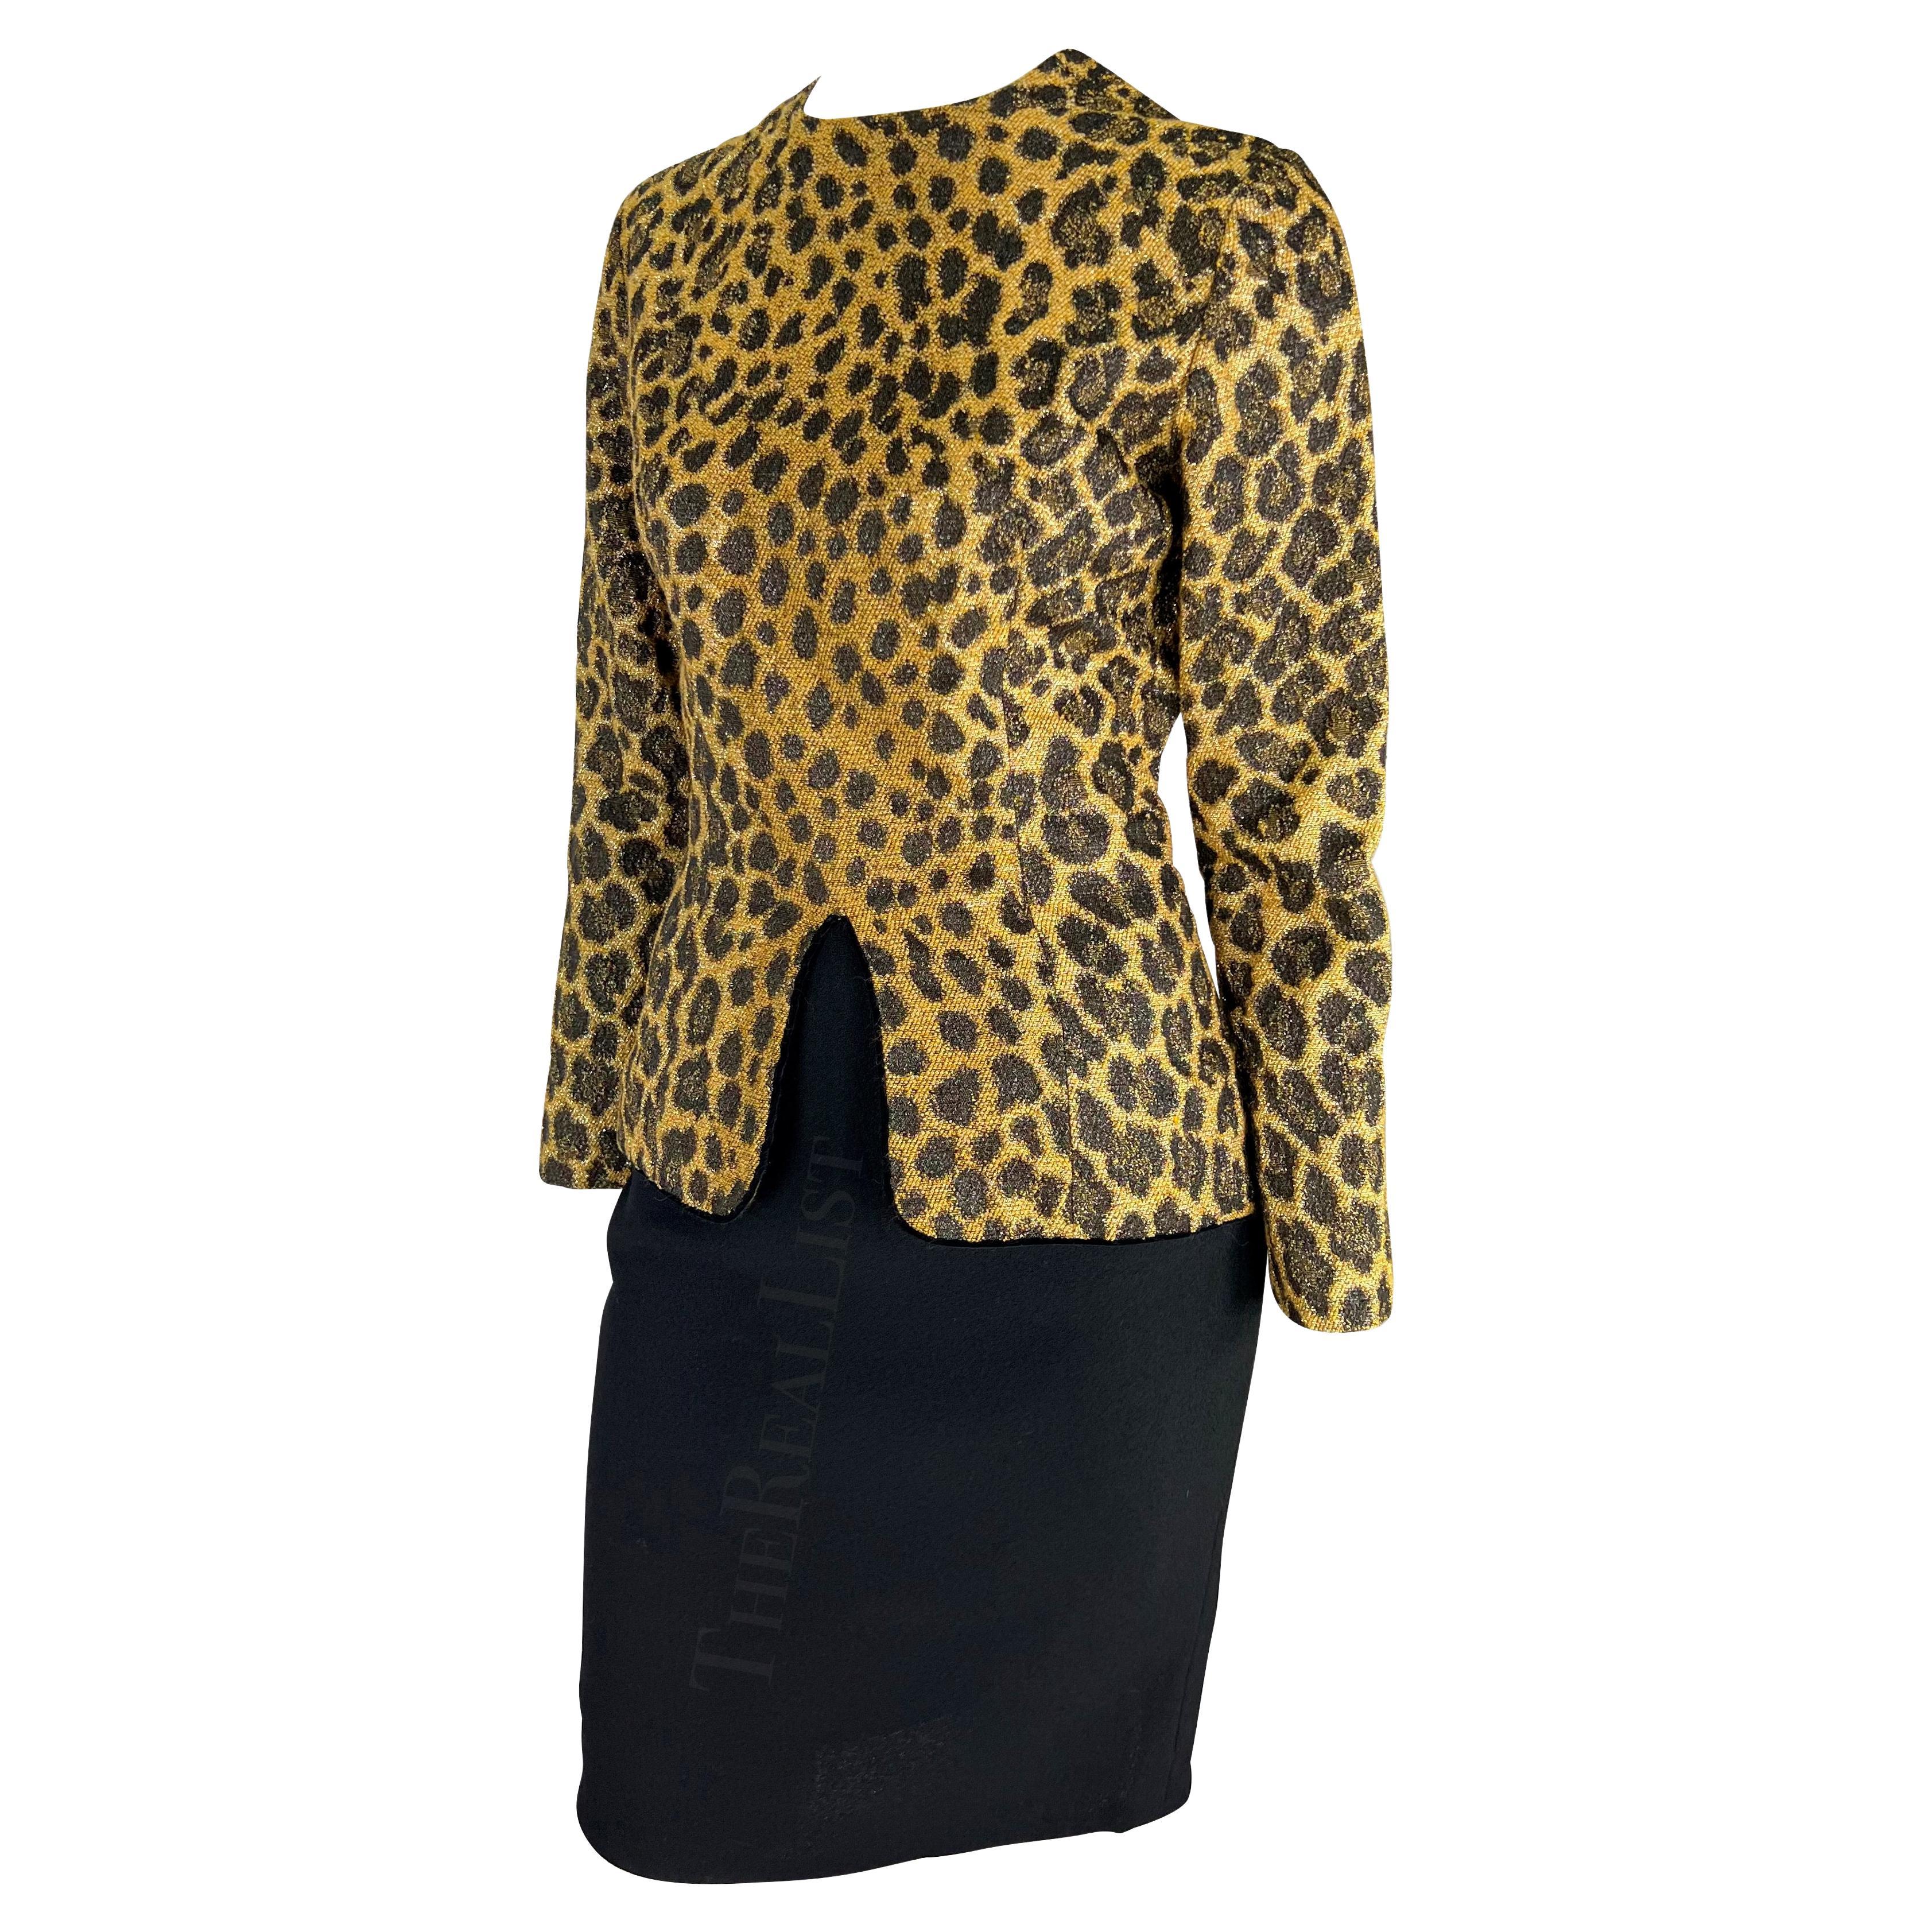 Early 1990s Christian Dior by Gianfranco Ferre Cheetah Print Embroidered Dress For Sale 1